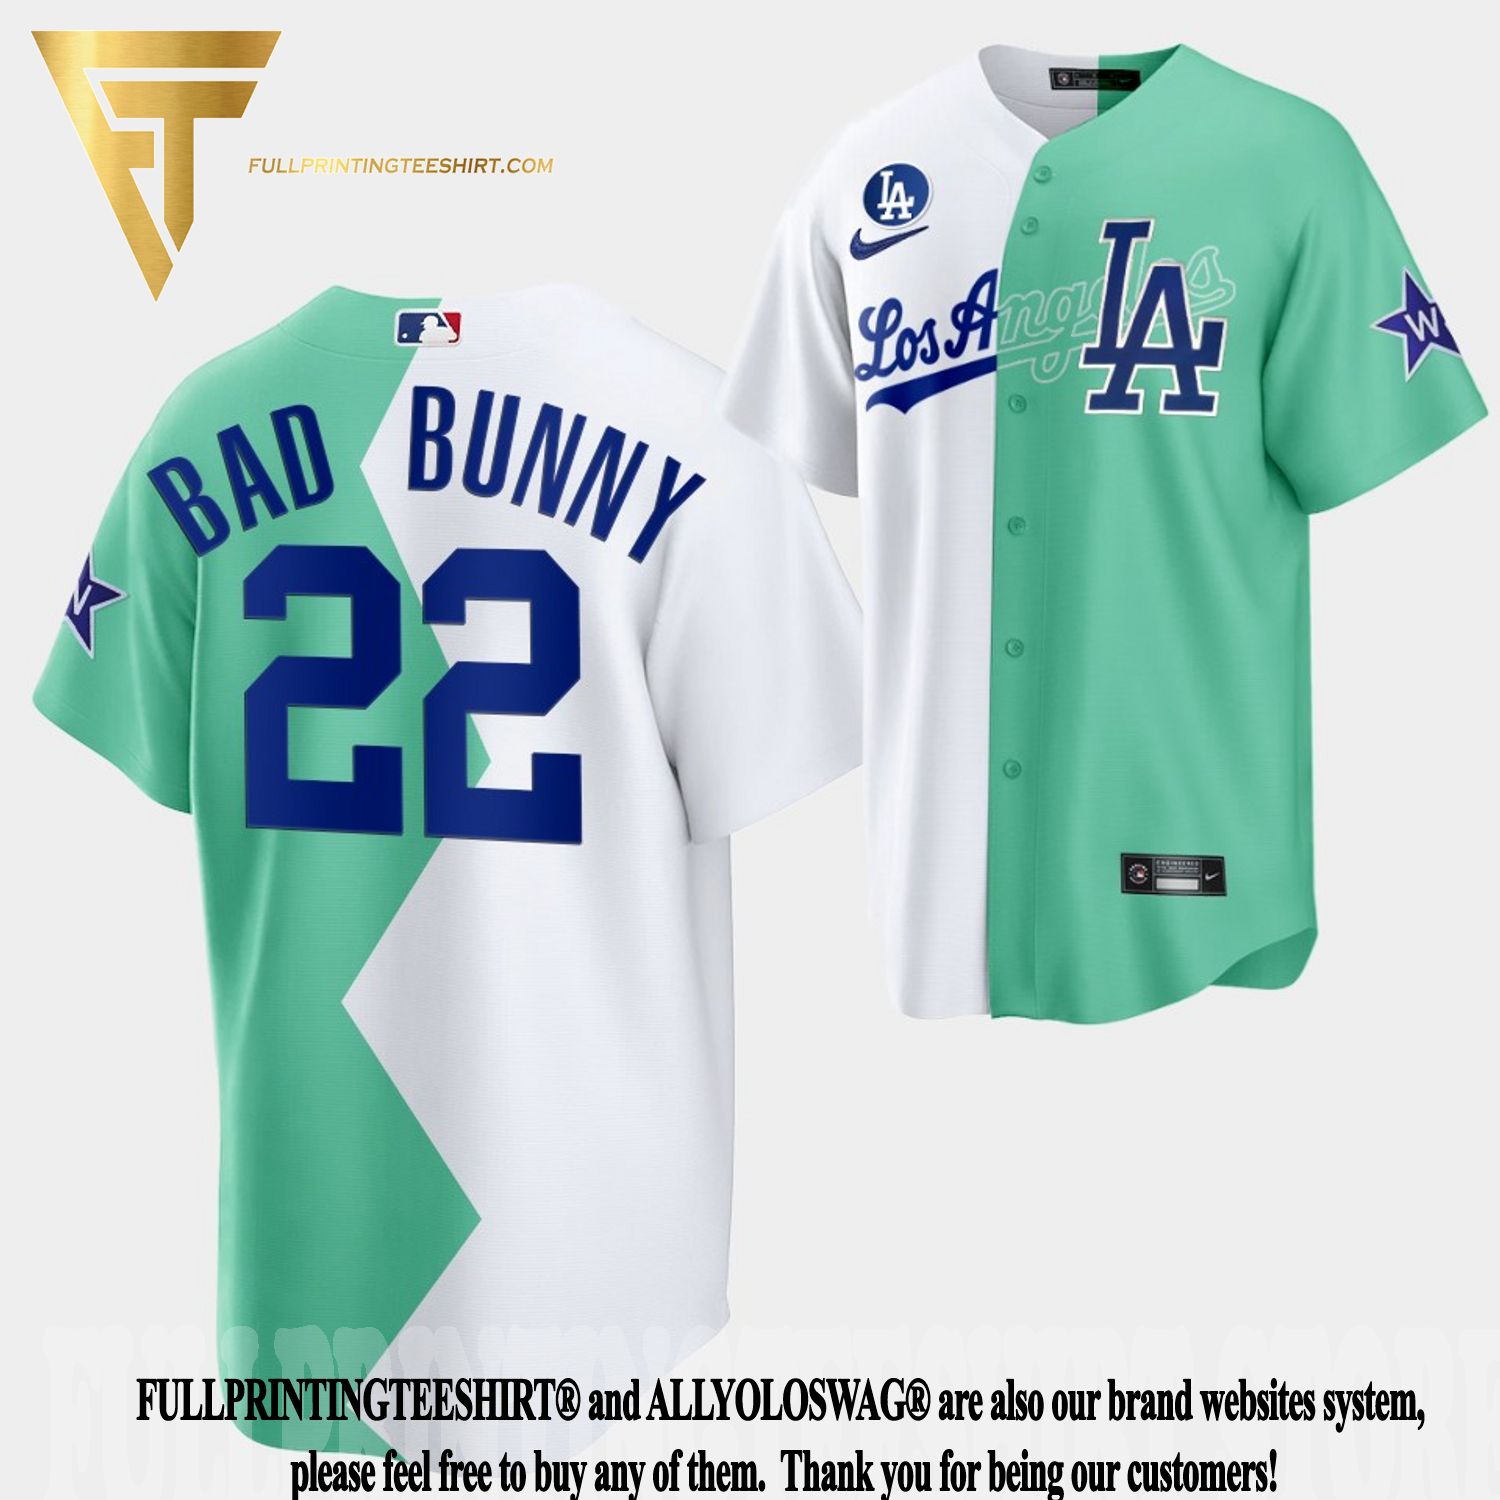 bad bunny jersey dodgers for sale